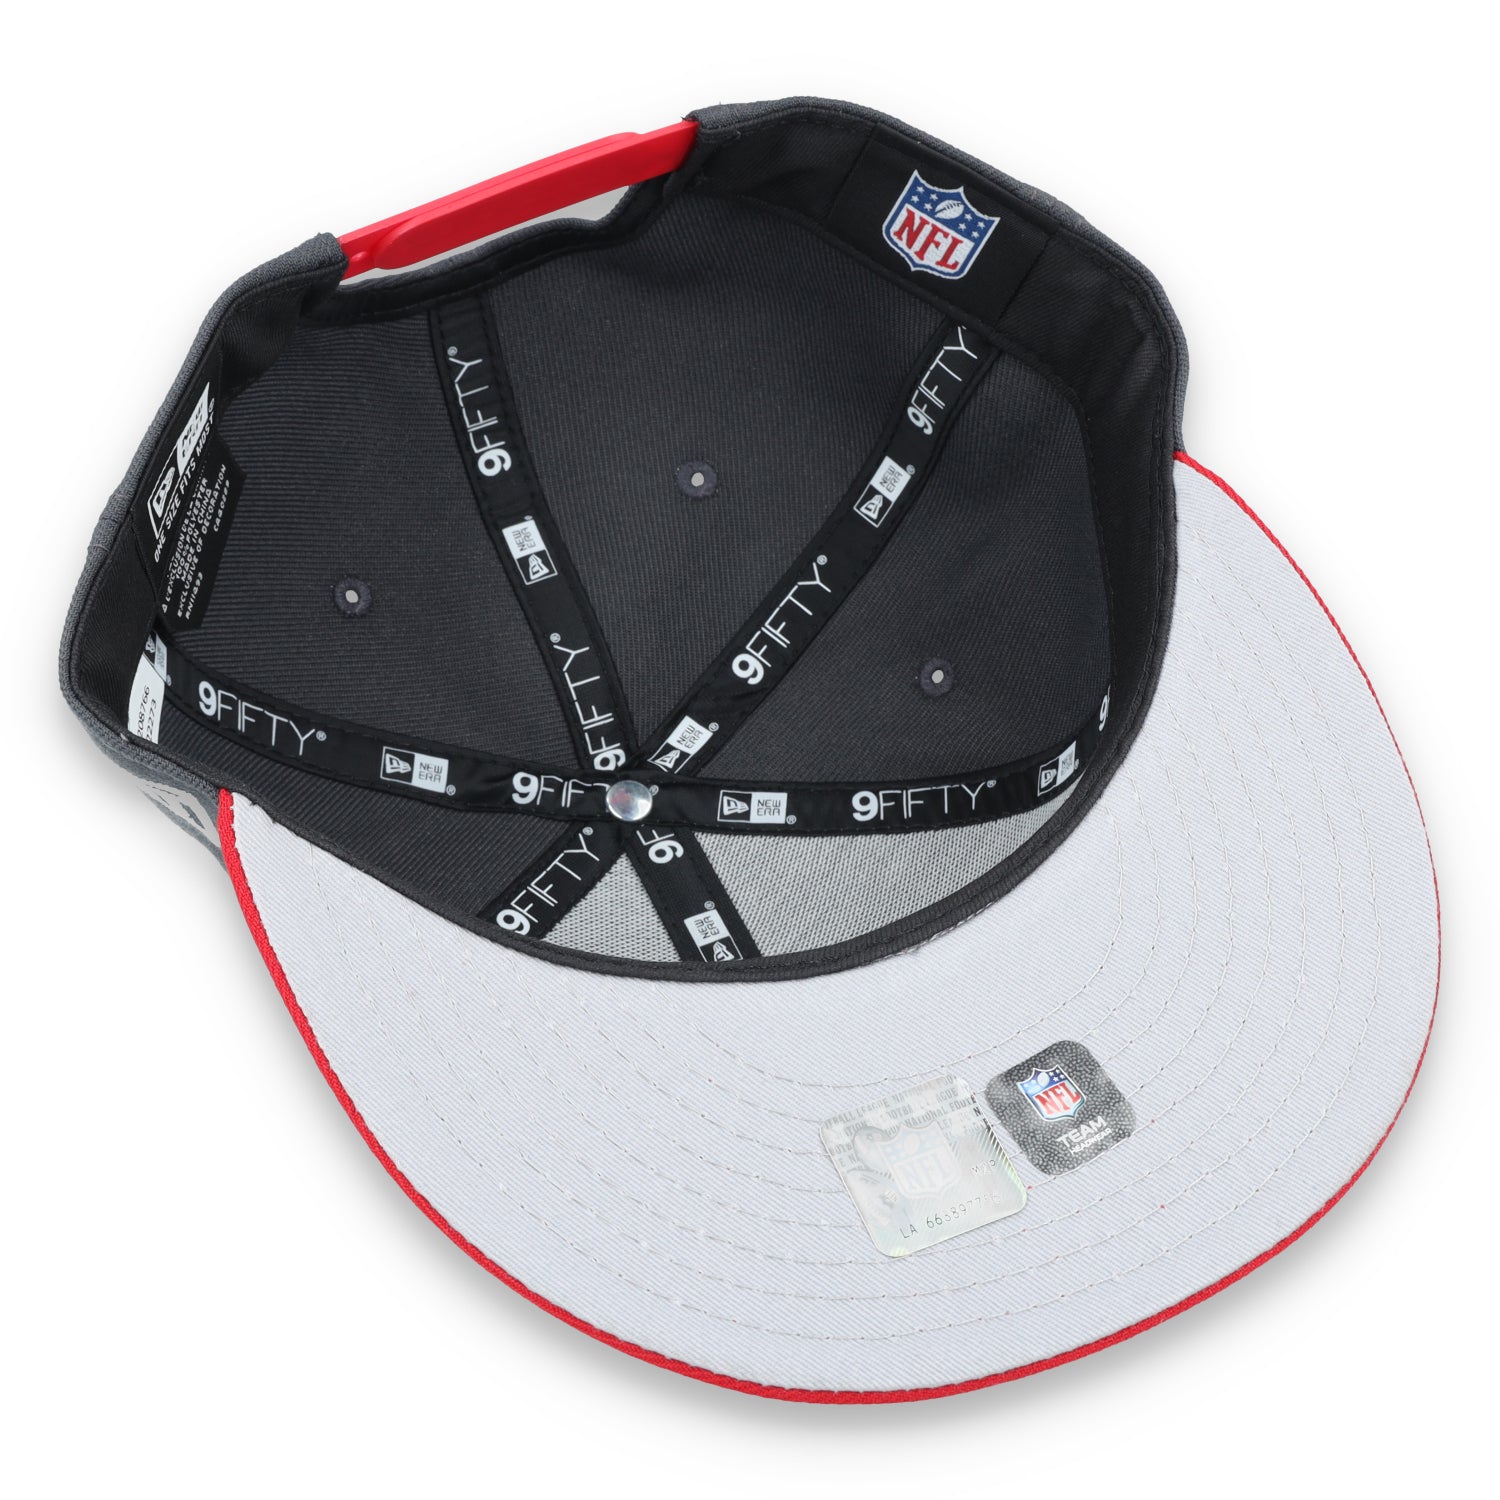 New Era San Francisco 49ers 2-Tone Color Pack 9FIFTY Snapback Hat-Grey/Scarlet/White